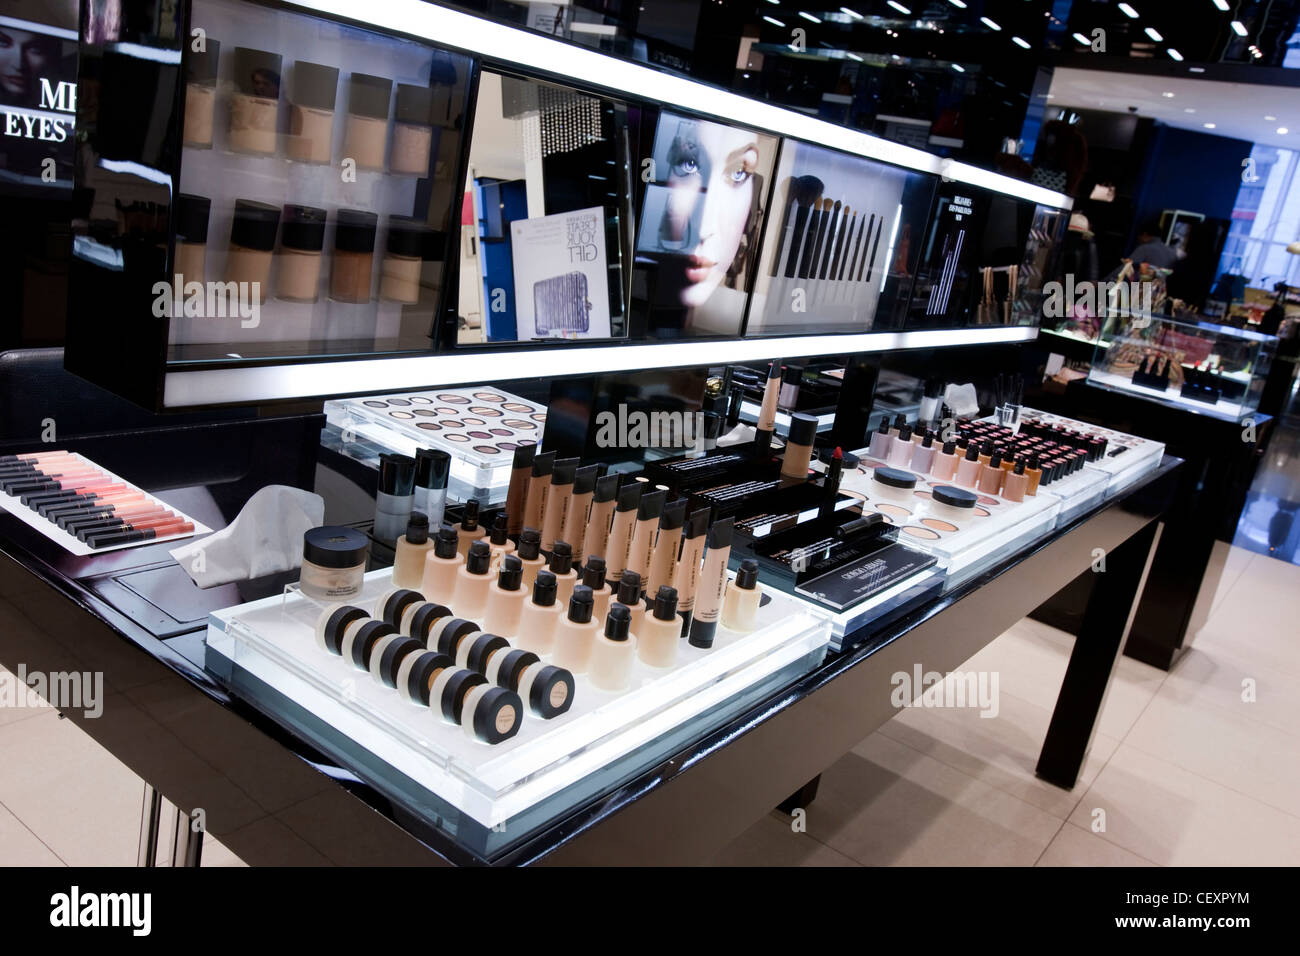 Giorgio Armani maquillage up stand, House of Fraser, Westfield, à Londres. Banque D'Images